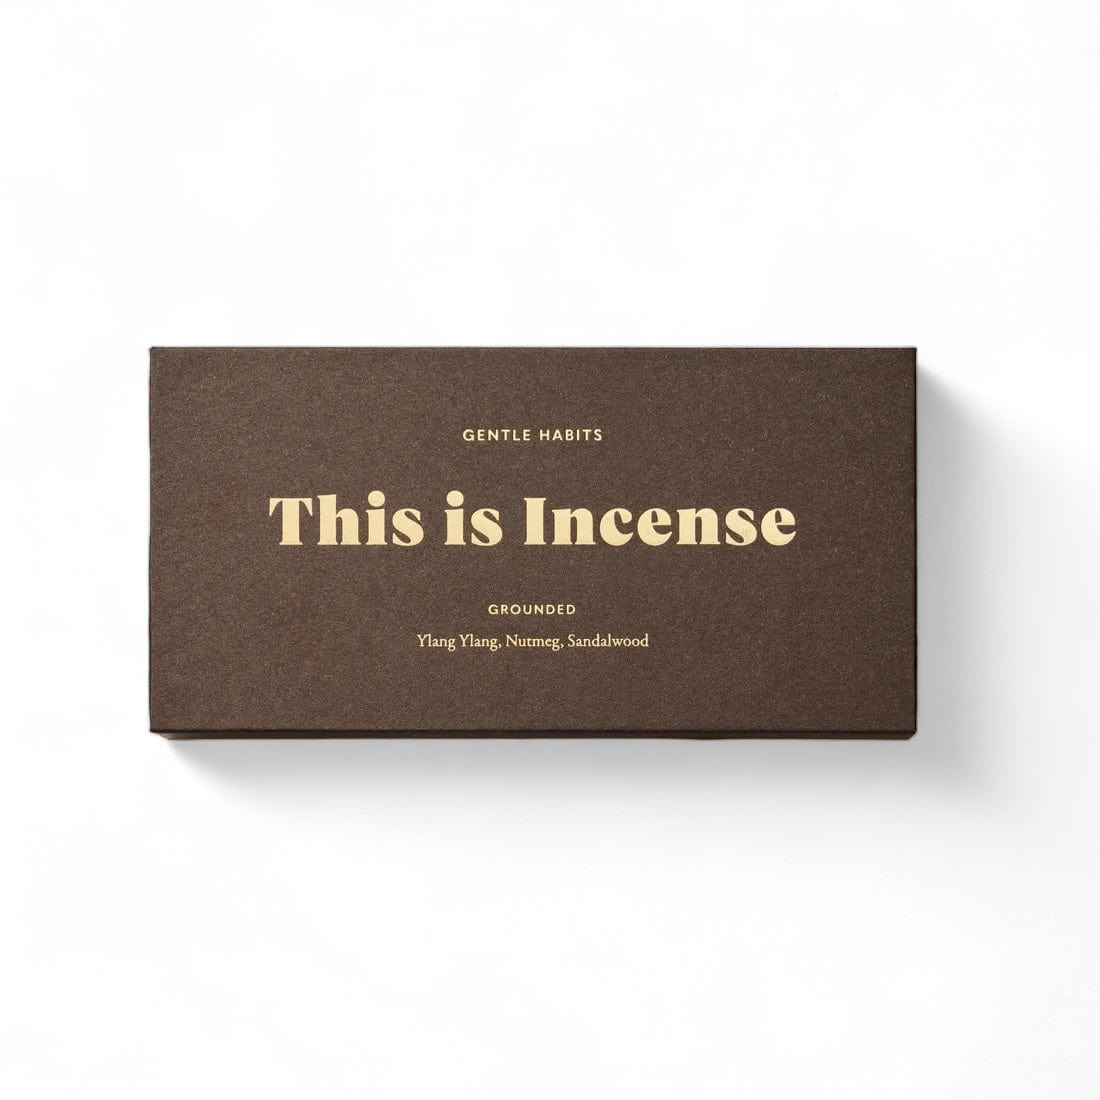 This is Incense - GROUNDED by Gentle Habits